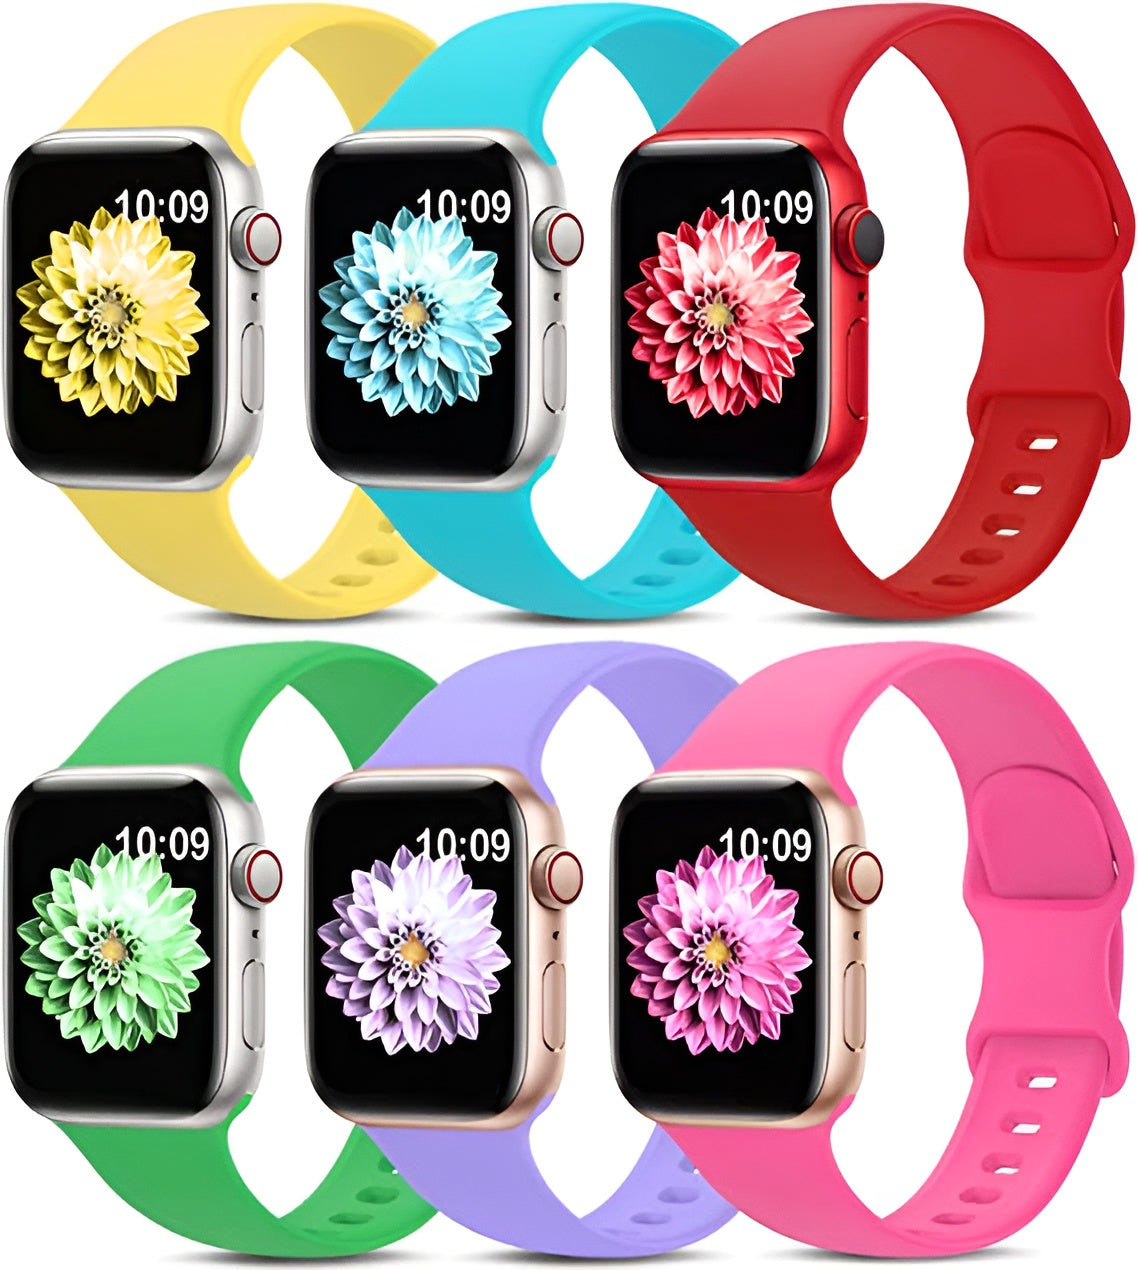 Silicon Apple Watch Strap 6 Pack Bundle